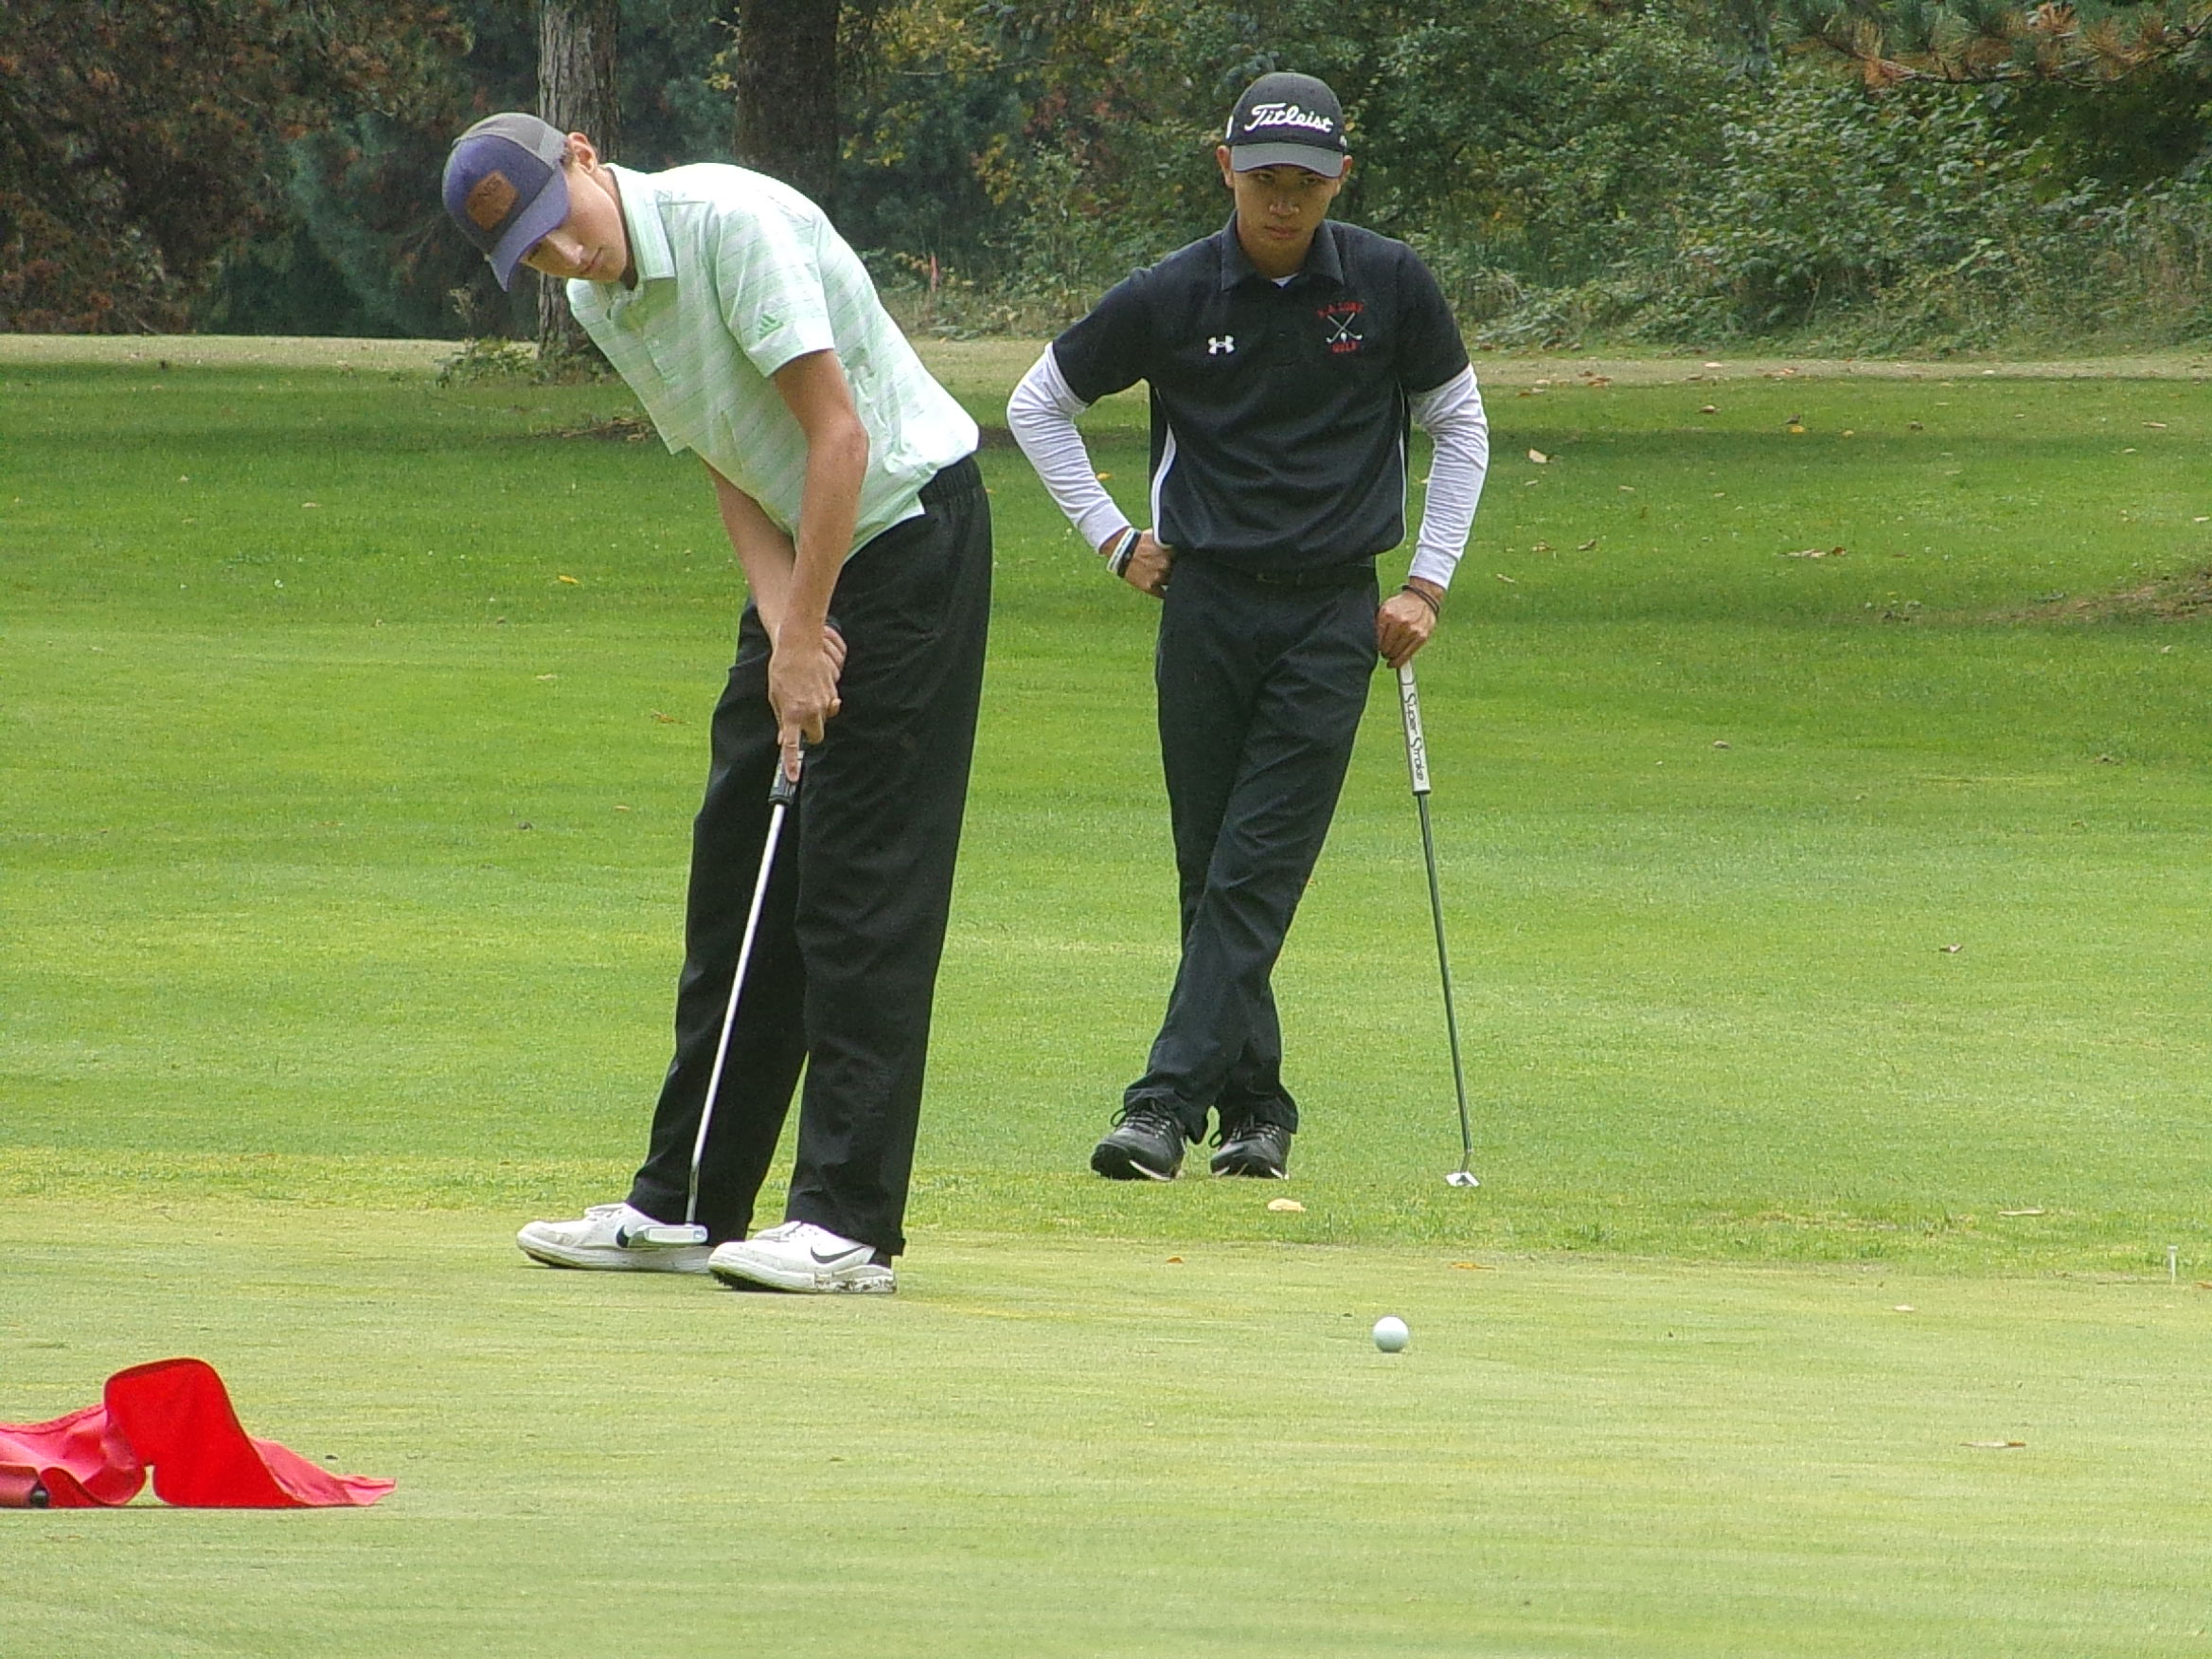 Woodland's Dane Huddleston putts out on No. 18 at Lewis River to win the Prairie Invitational as R.A. Long's Hewie Nguyen watches on Wednesday, Sept.